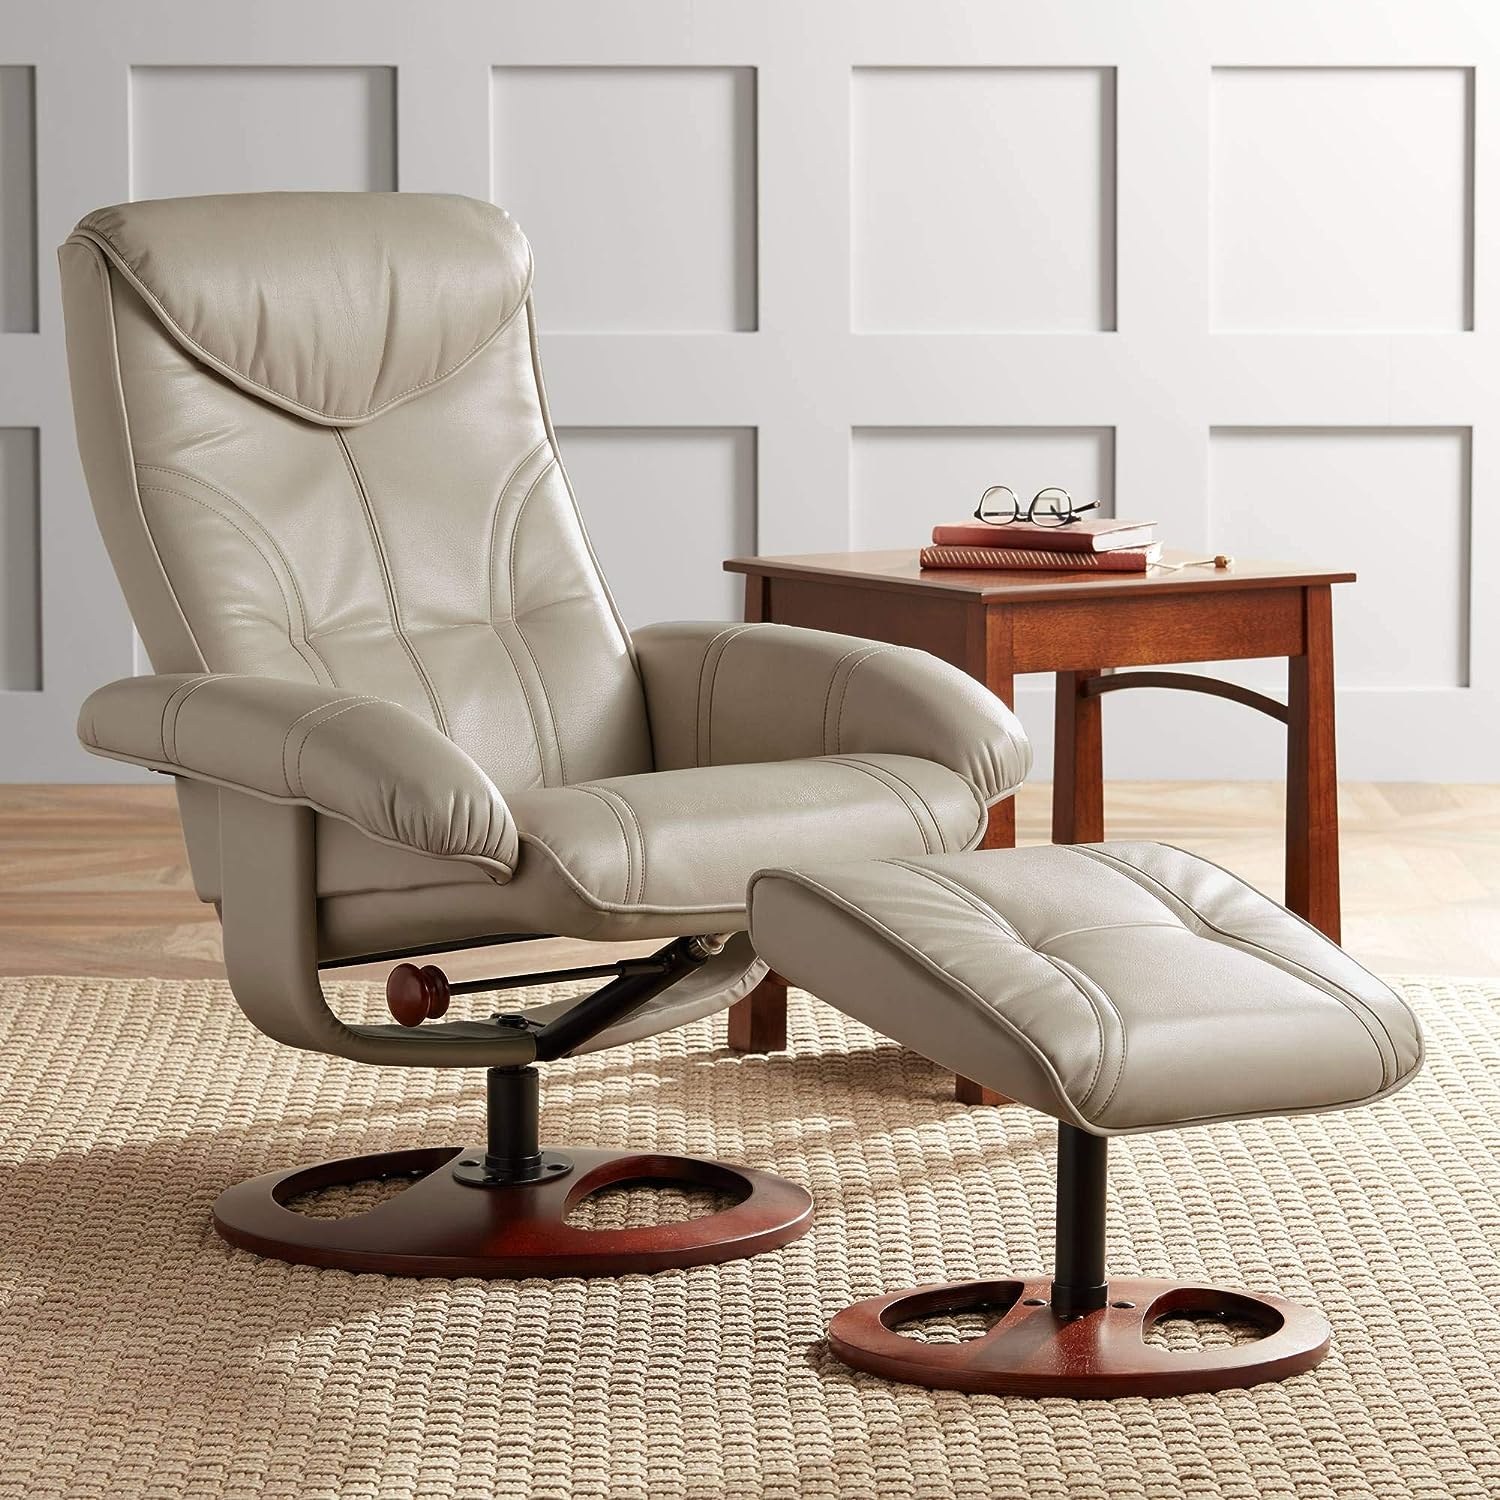 BenchMaster Newport Taupe Swivel Faux Leather Recliner [...]